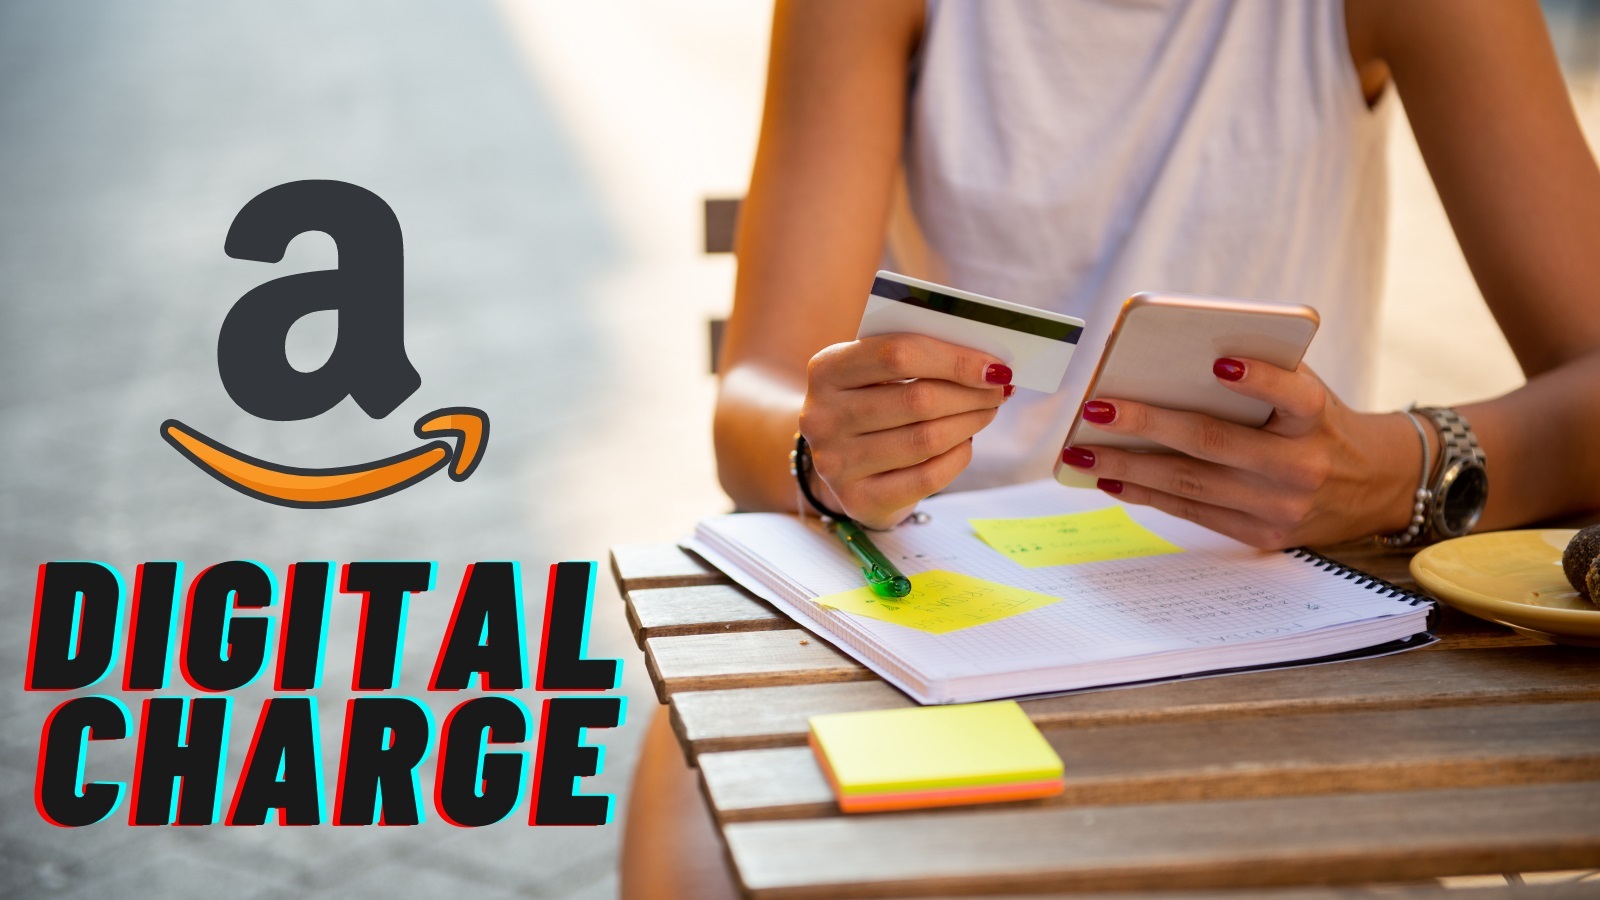 All You Need to Know about Amazon Digital Charge!